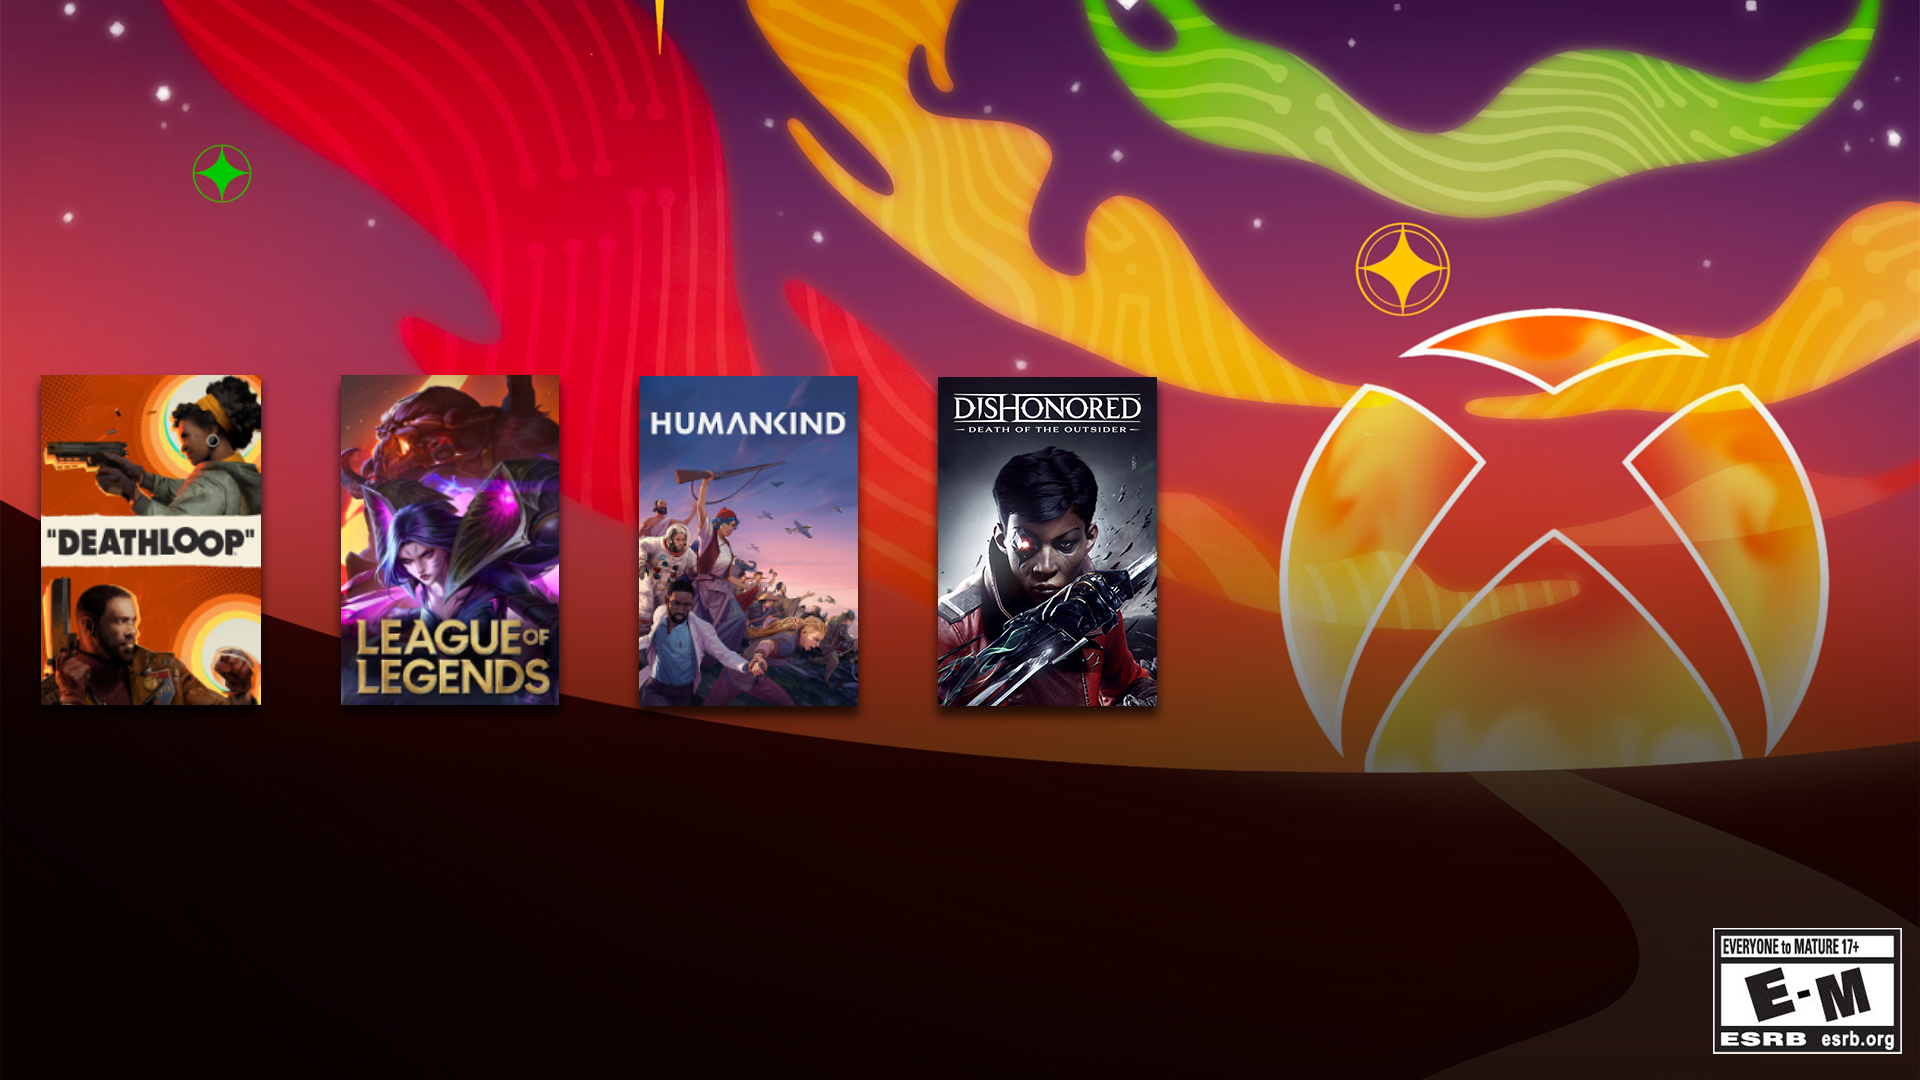 The Xbox logo stylized in celebration of Black History month featuring a nexus with a red and orange sunset overlayed with the box art for the games Deathloop, League of Legends, Humankind, and Dishonored: Death of an Outsider.